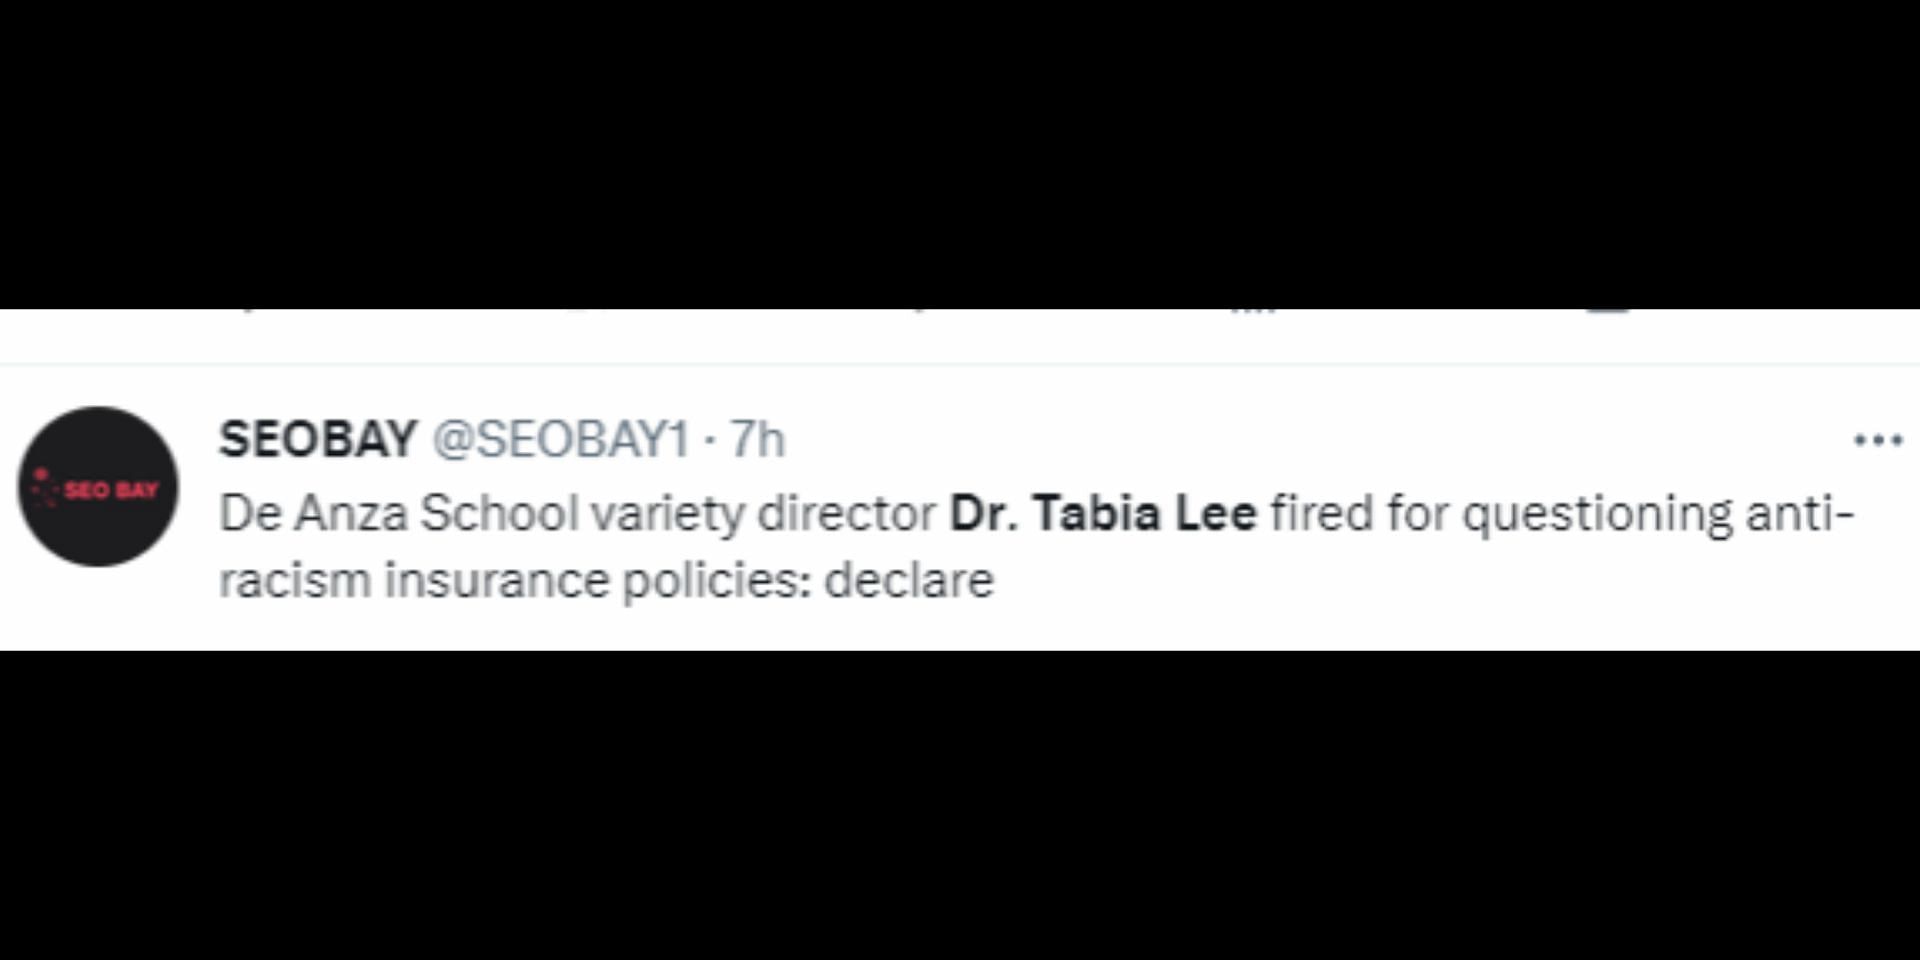 Dr Tabia Lee was fired from her job for questioning anti-racism policies. (Image via Twitter/@SEOBAY1)